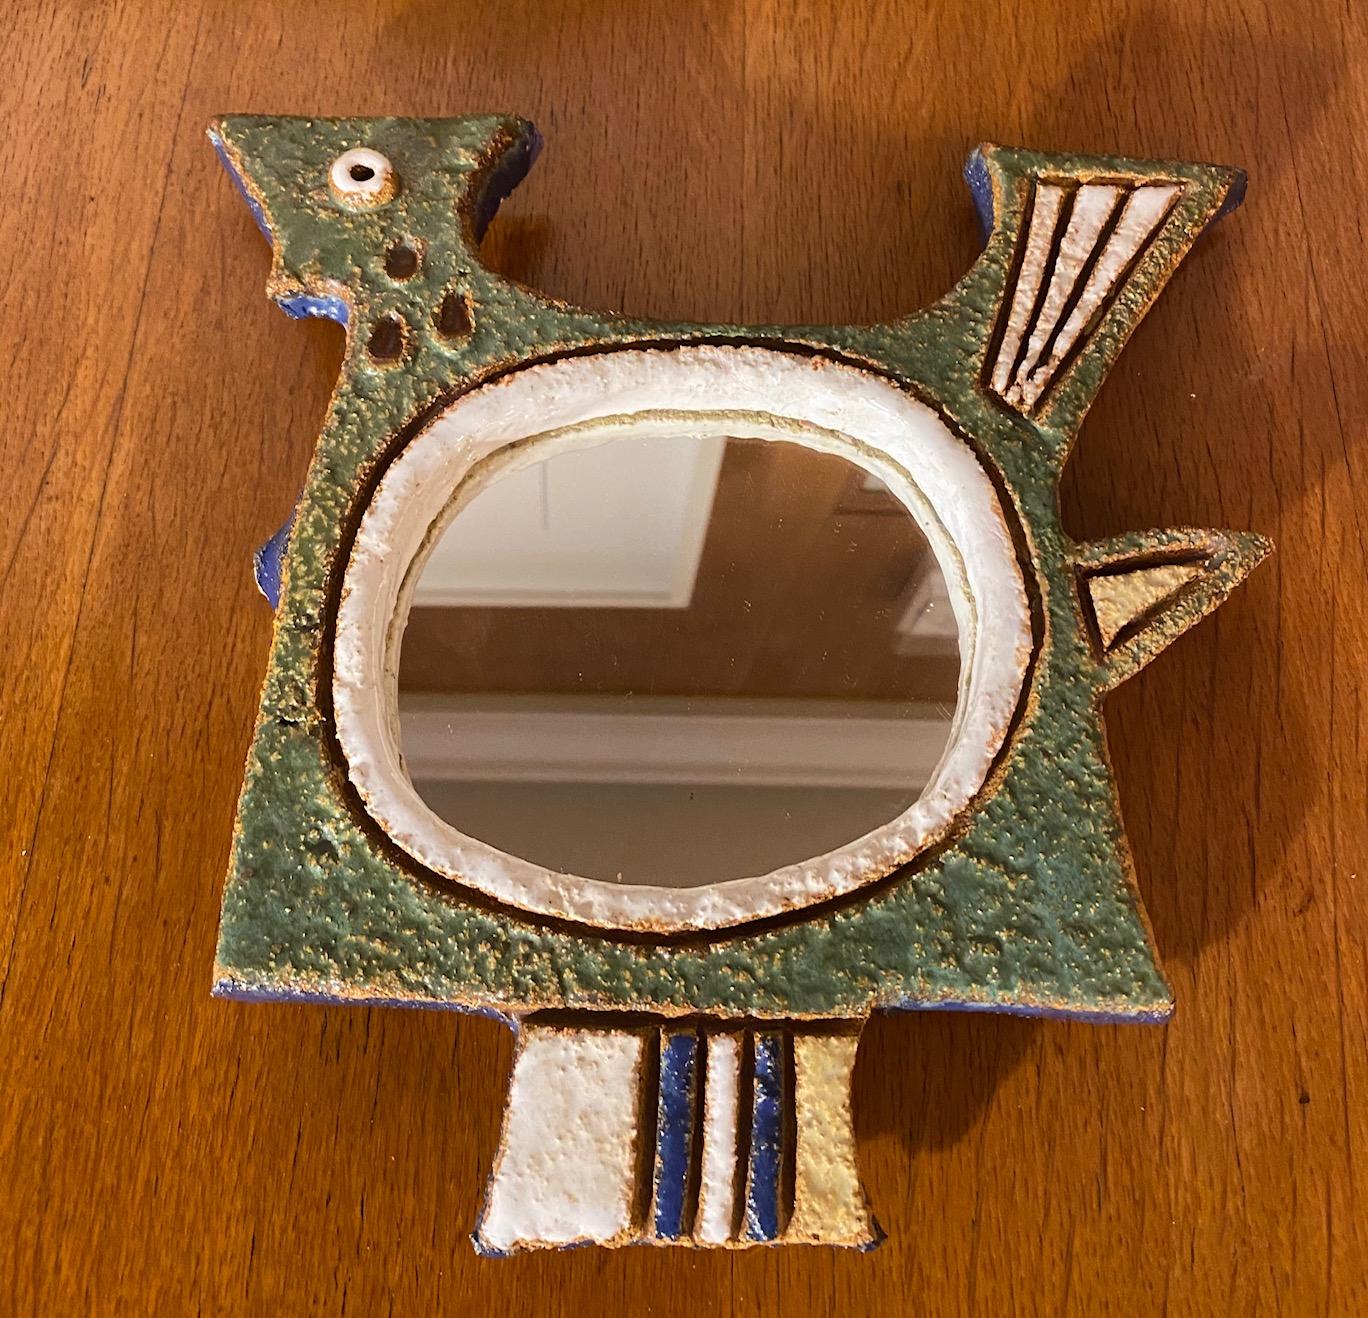 Ceramic mirror, France, Vallauris, 1960s
Attibuted to Les Argonautes (Frédérique Bourguet and Isabelle Ferlay), french workshop created in Vallauris, south of France, in 1953 and active until the death of Federique Bourguet in 1997.